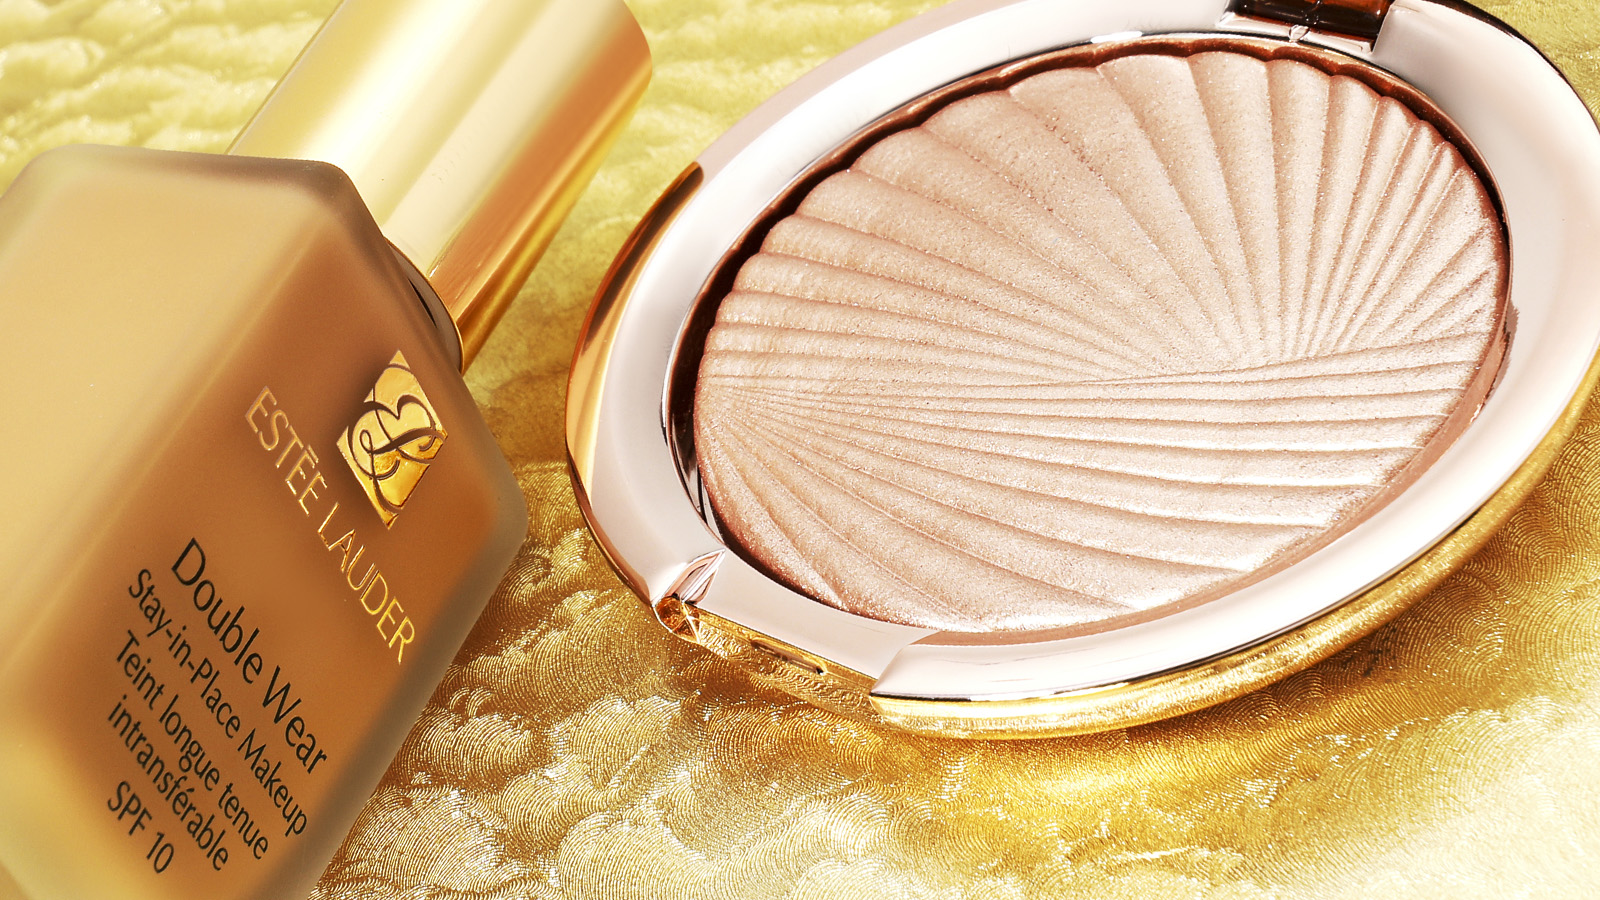 15 Best Estee Lauder Products That Are Your Skin's Best Friends